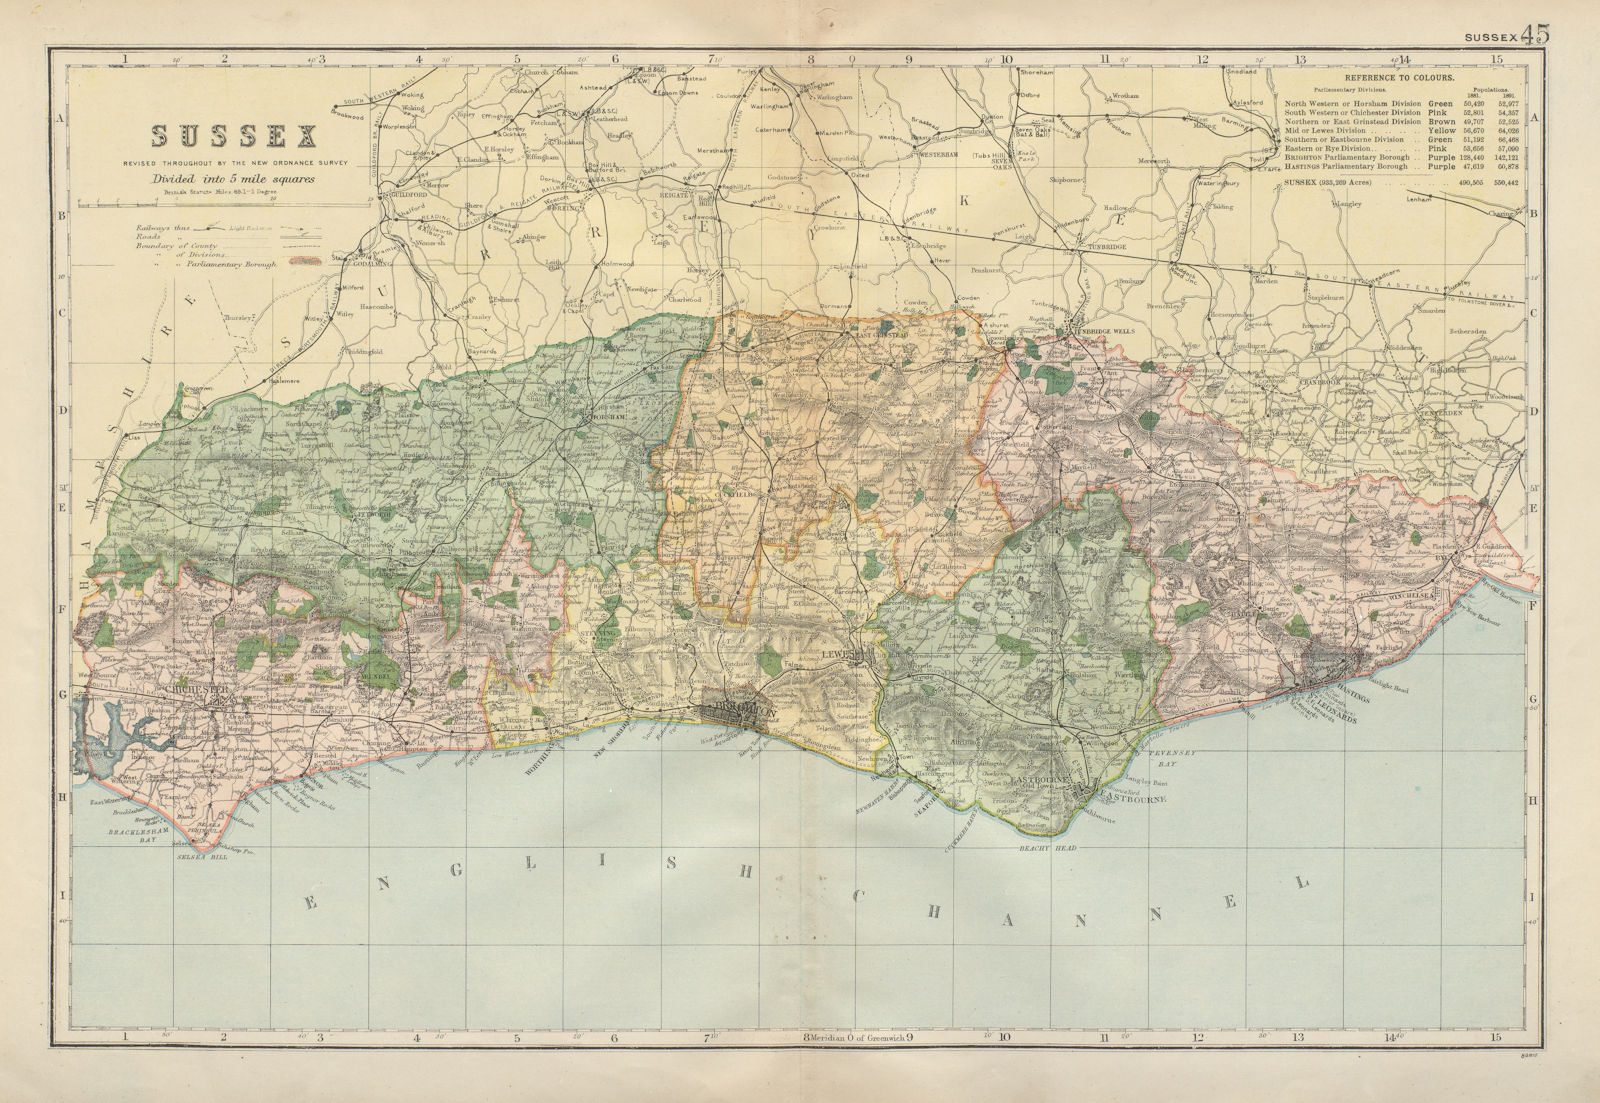 SUSSEX. County map. Parliamentary constituencies divisions. Railways. BACON 1900